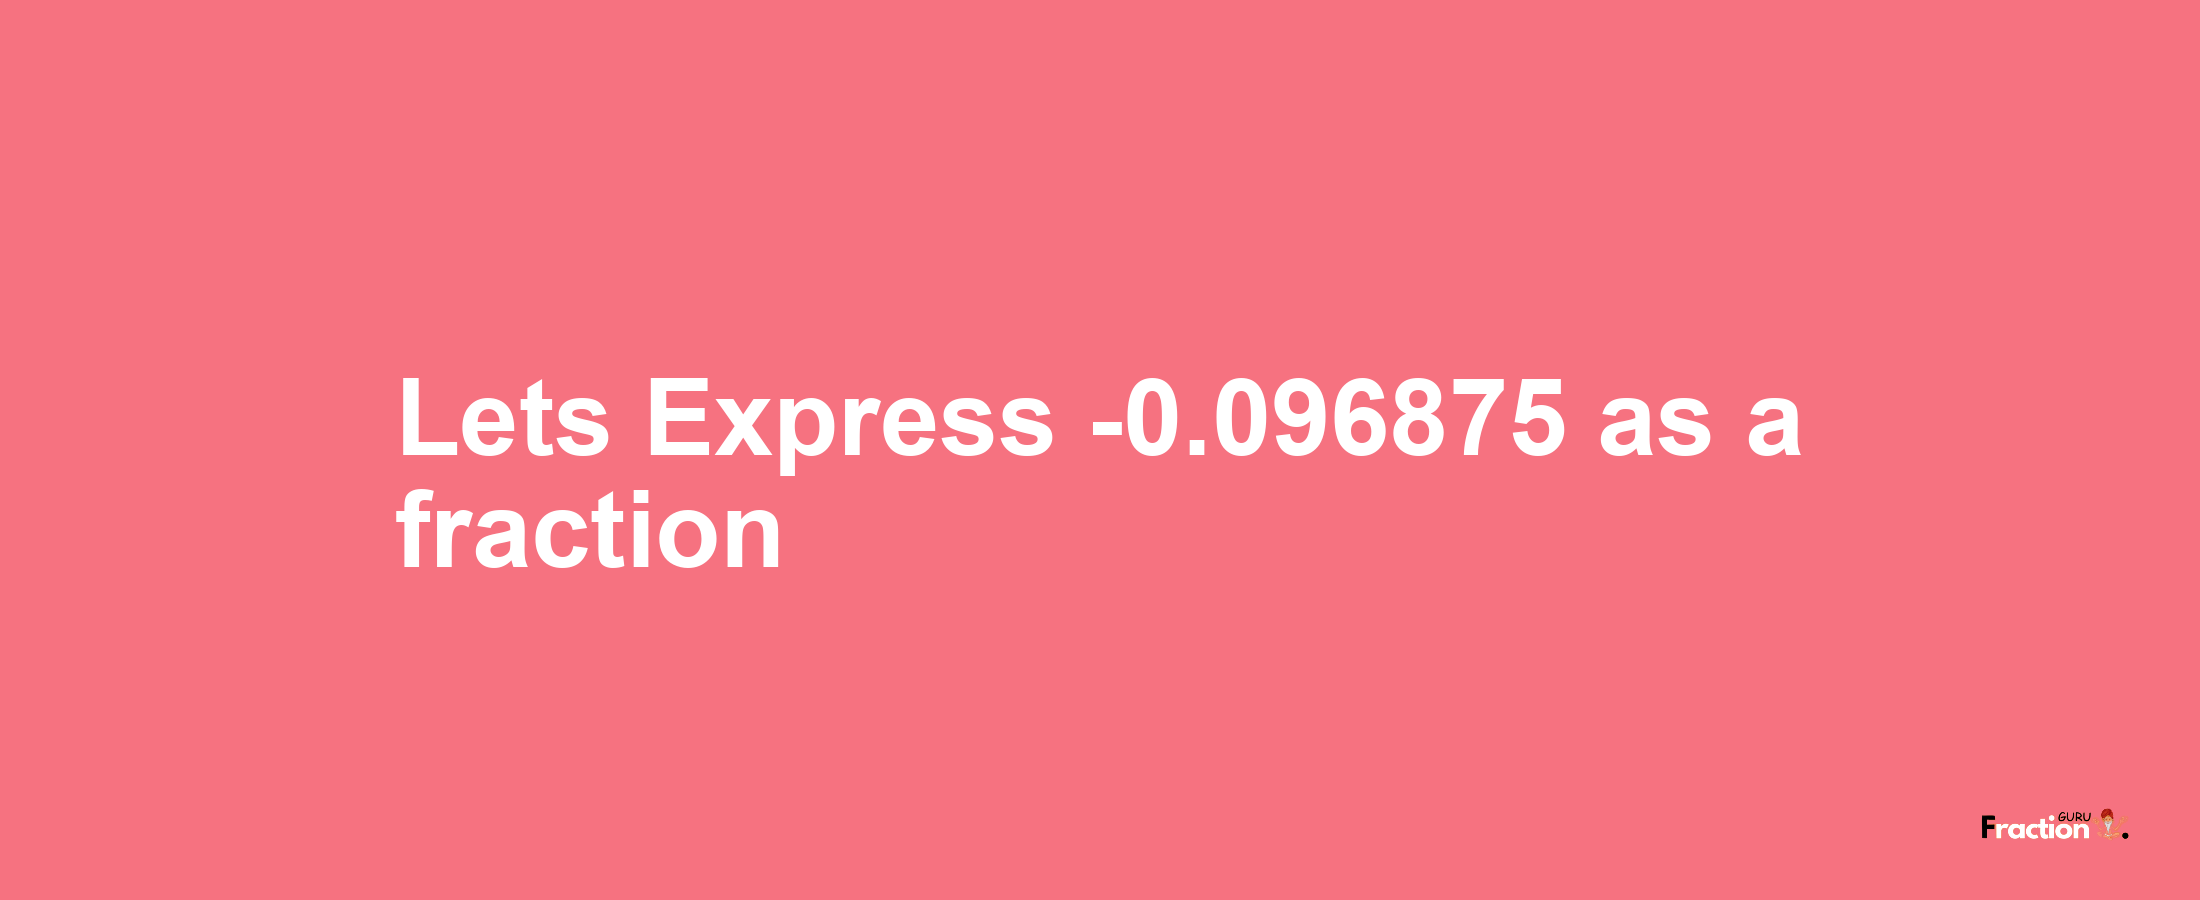 Lets Express -0.096875 as afraction